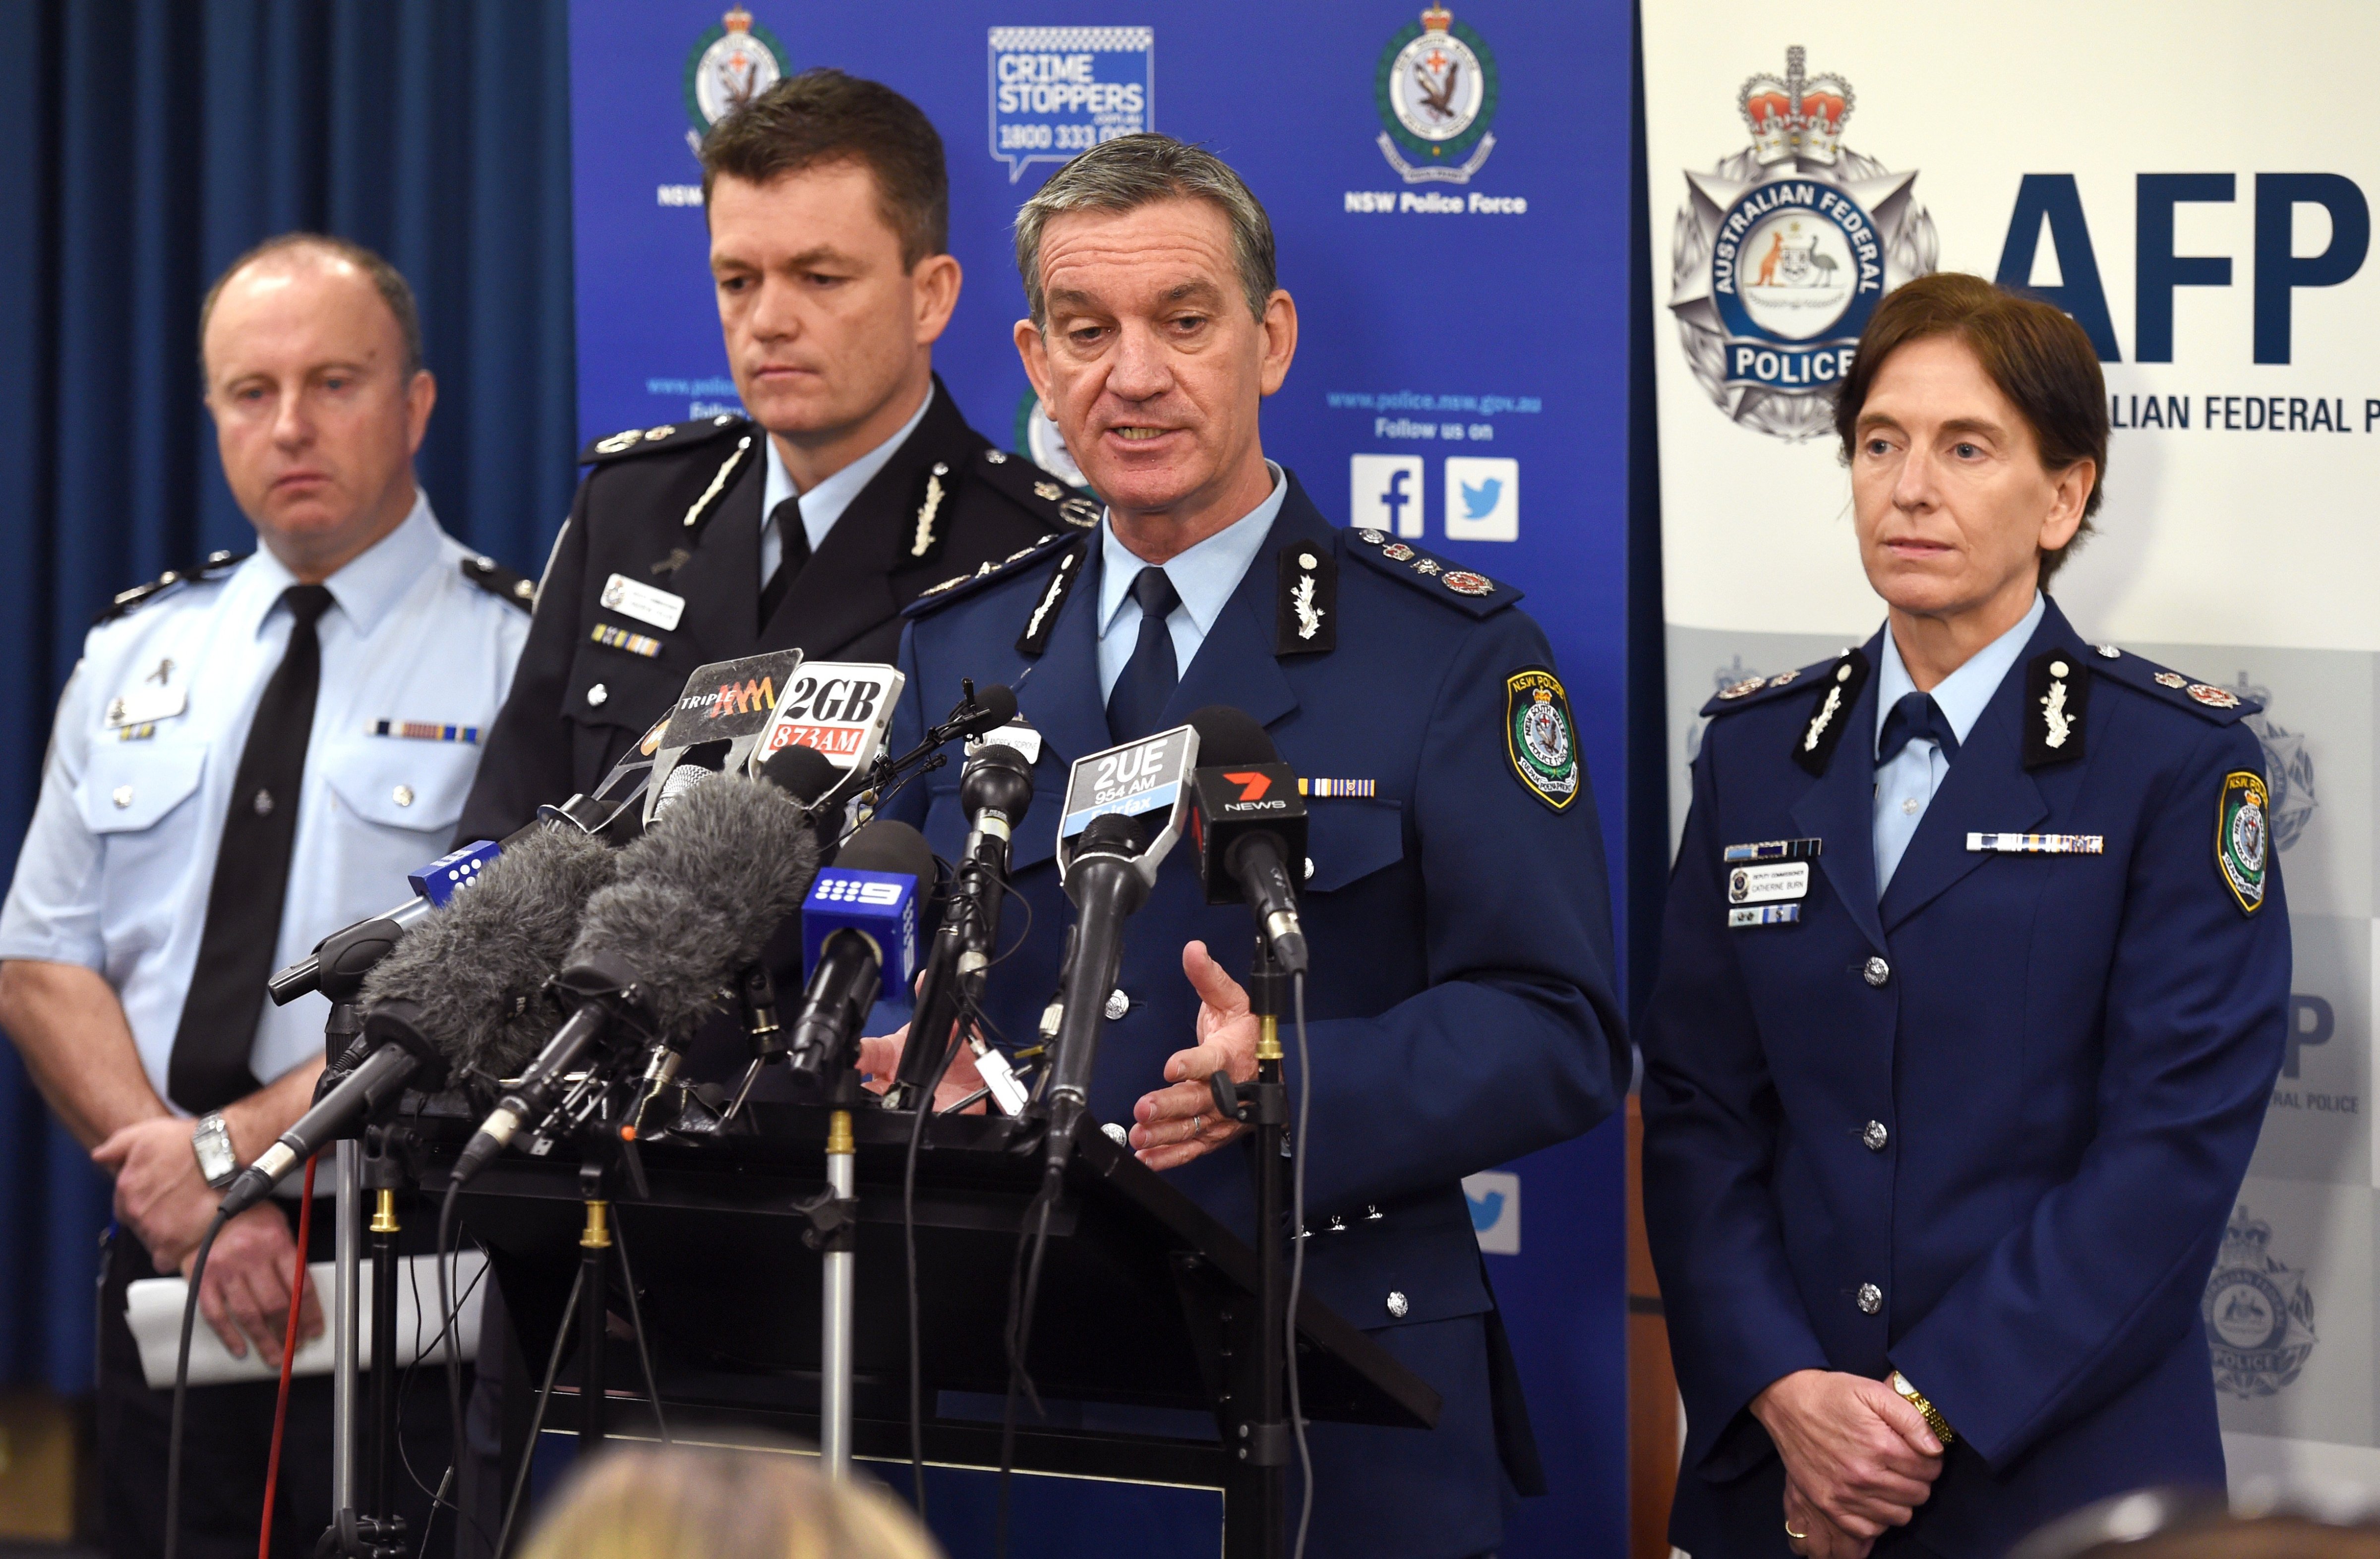 New South Wales police commissioner Andrew Scipione, second from right, speaks during a press conference in Sydney on Sept. 18, 2014, after Australia's largest ever counterterrorism raids detained 15 people and disrupted plans to "commit violent acts" (William West—AFP/Getty Images)